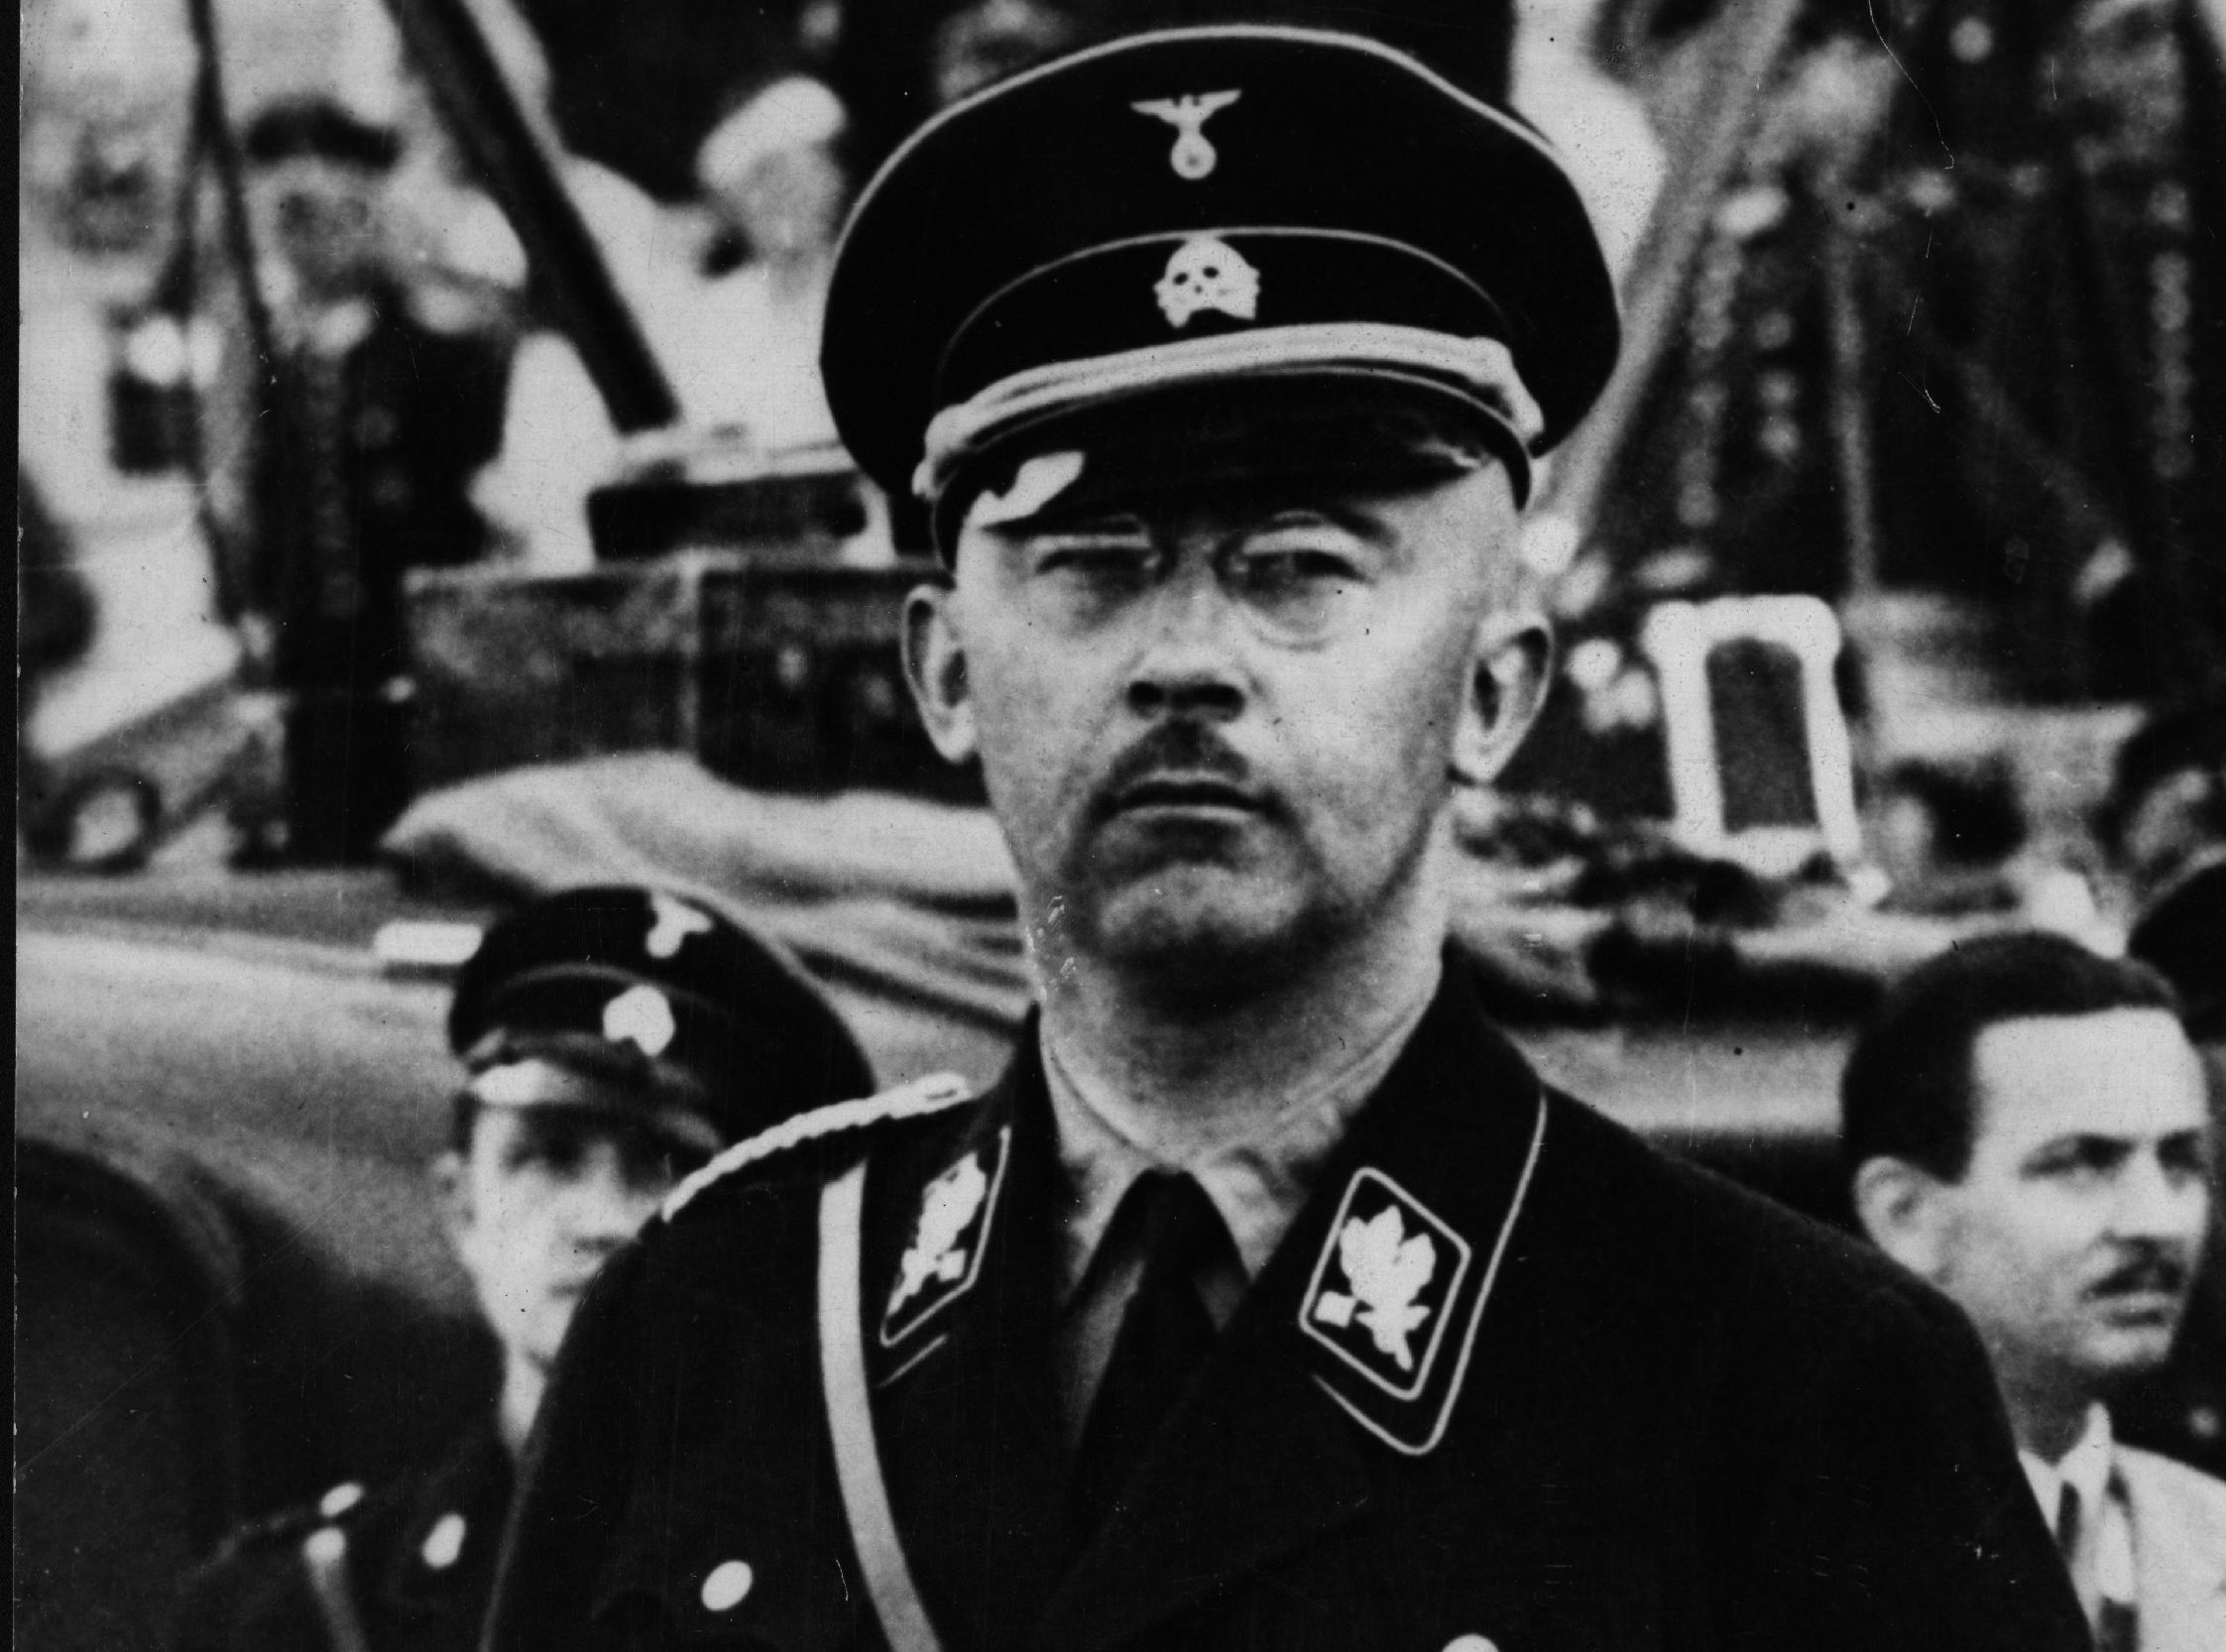 Heinrich Himmler chief of the SS and the Gestapo dressed in SS uniform.